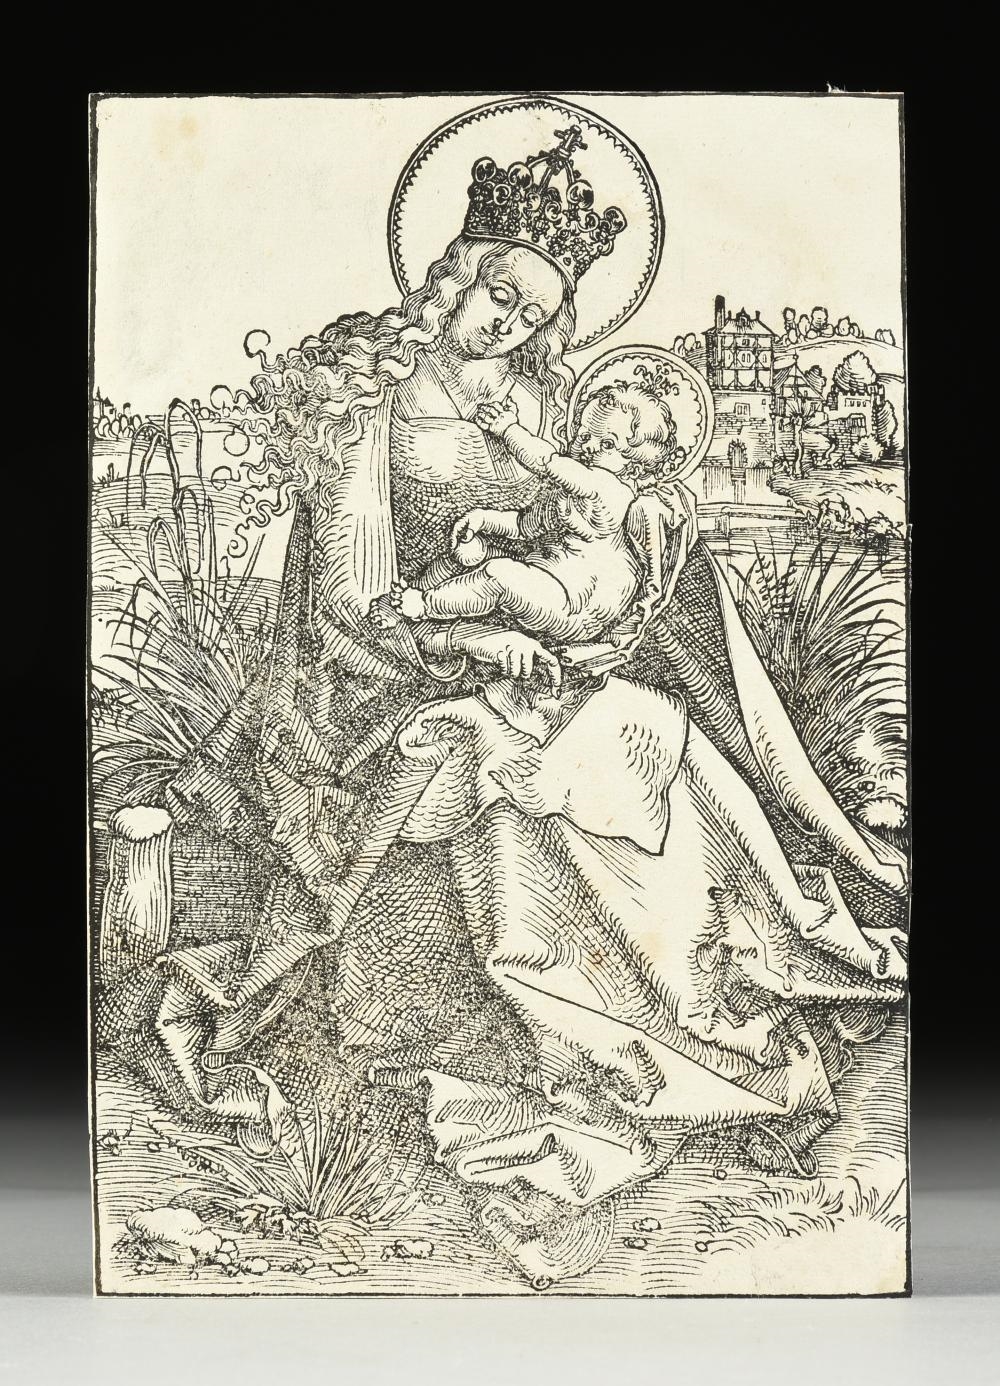 "Madonna and Child on a Grassy Bank by Hans Baldung Grien, 1505-1507